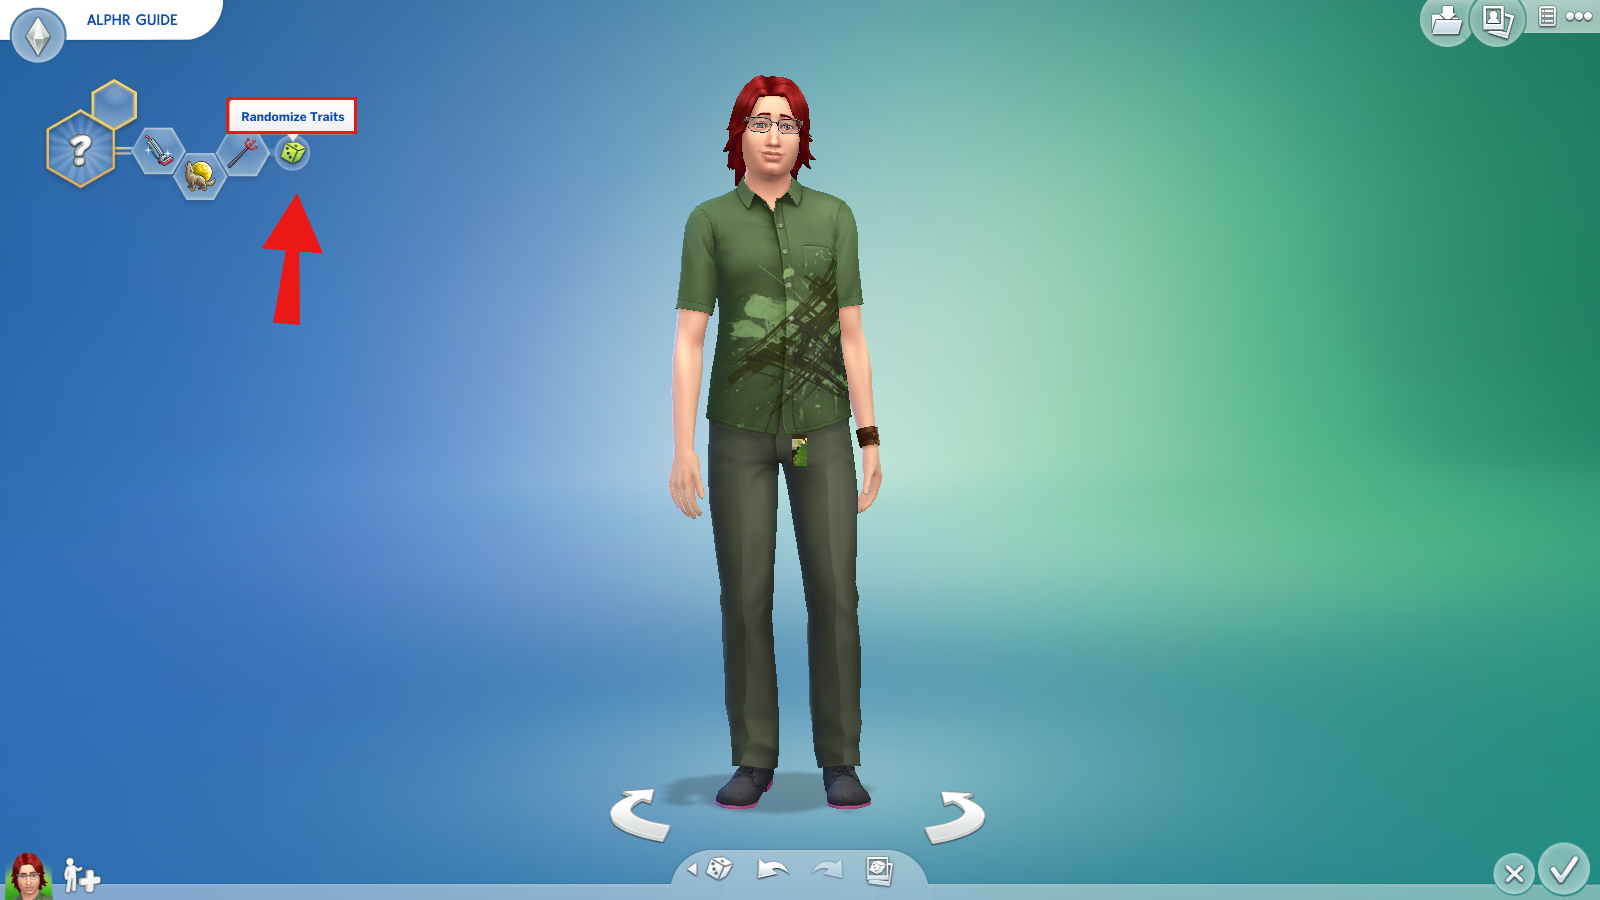 Change Sims Name and Traits – Crinrict's Sims 4 Help Blog